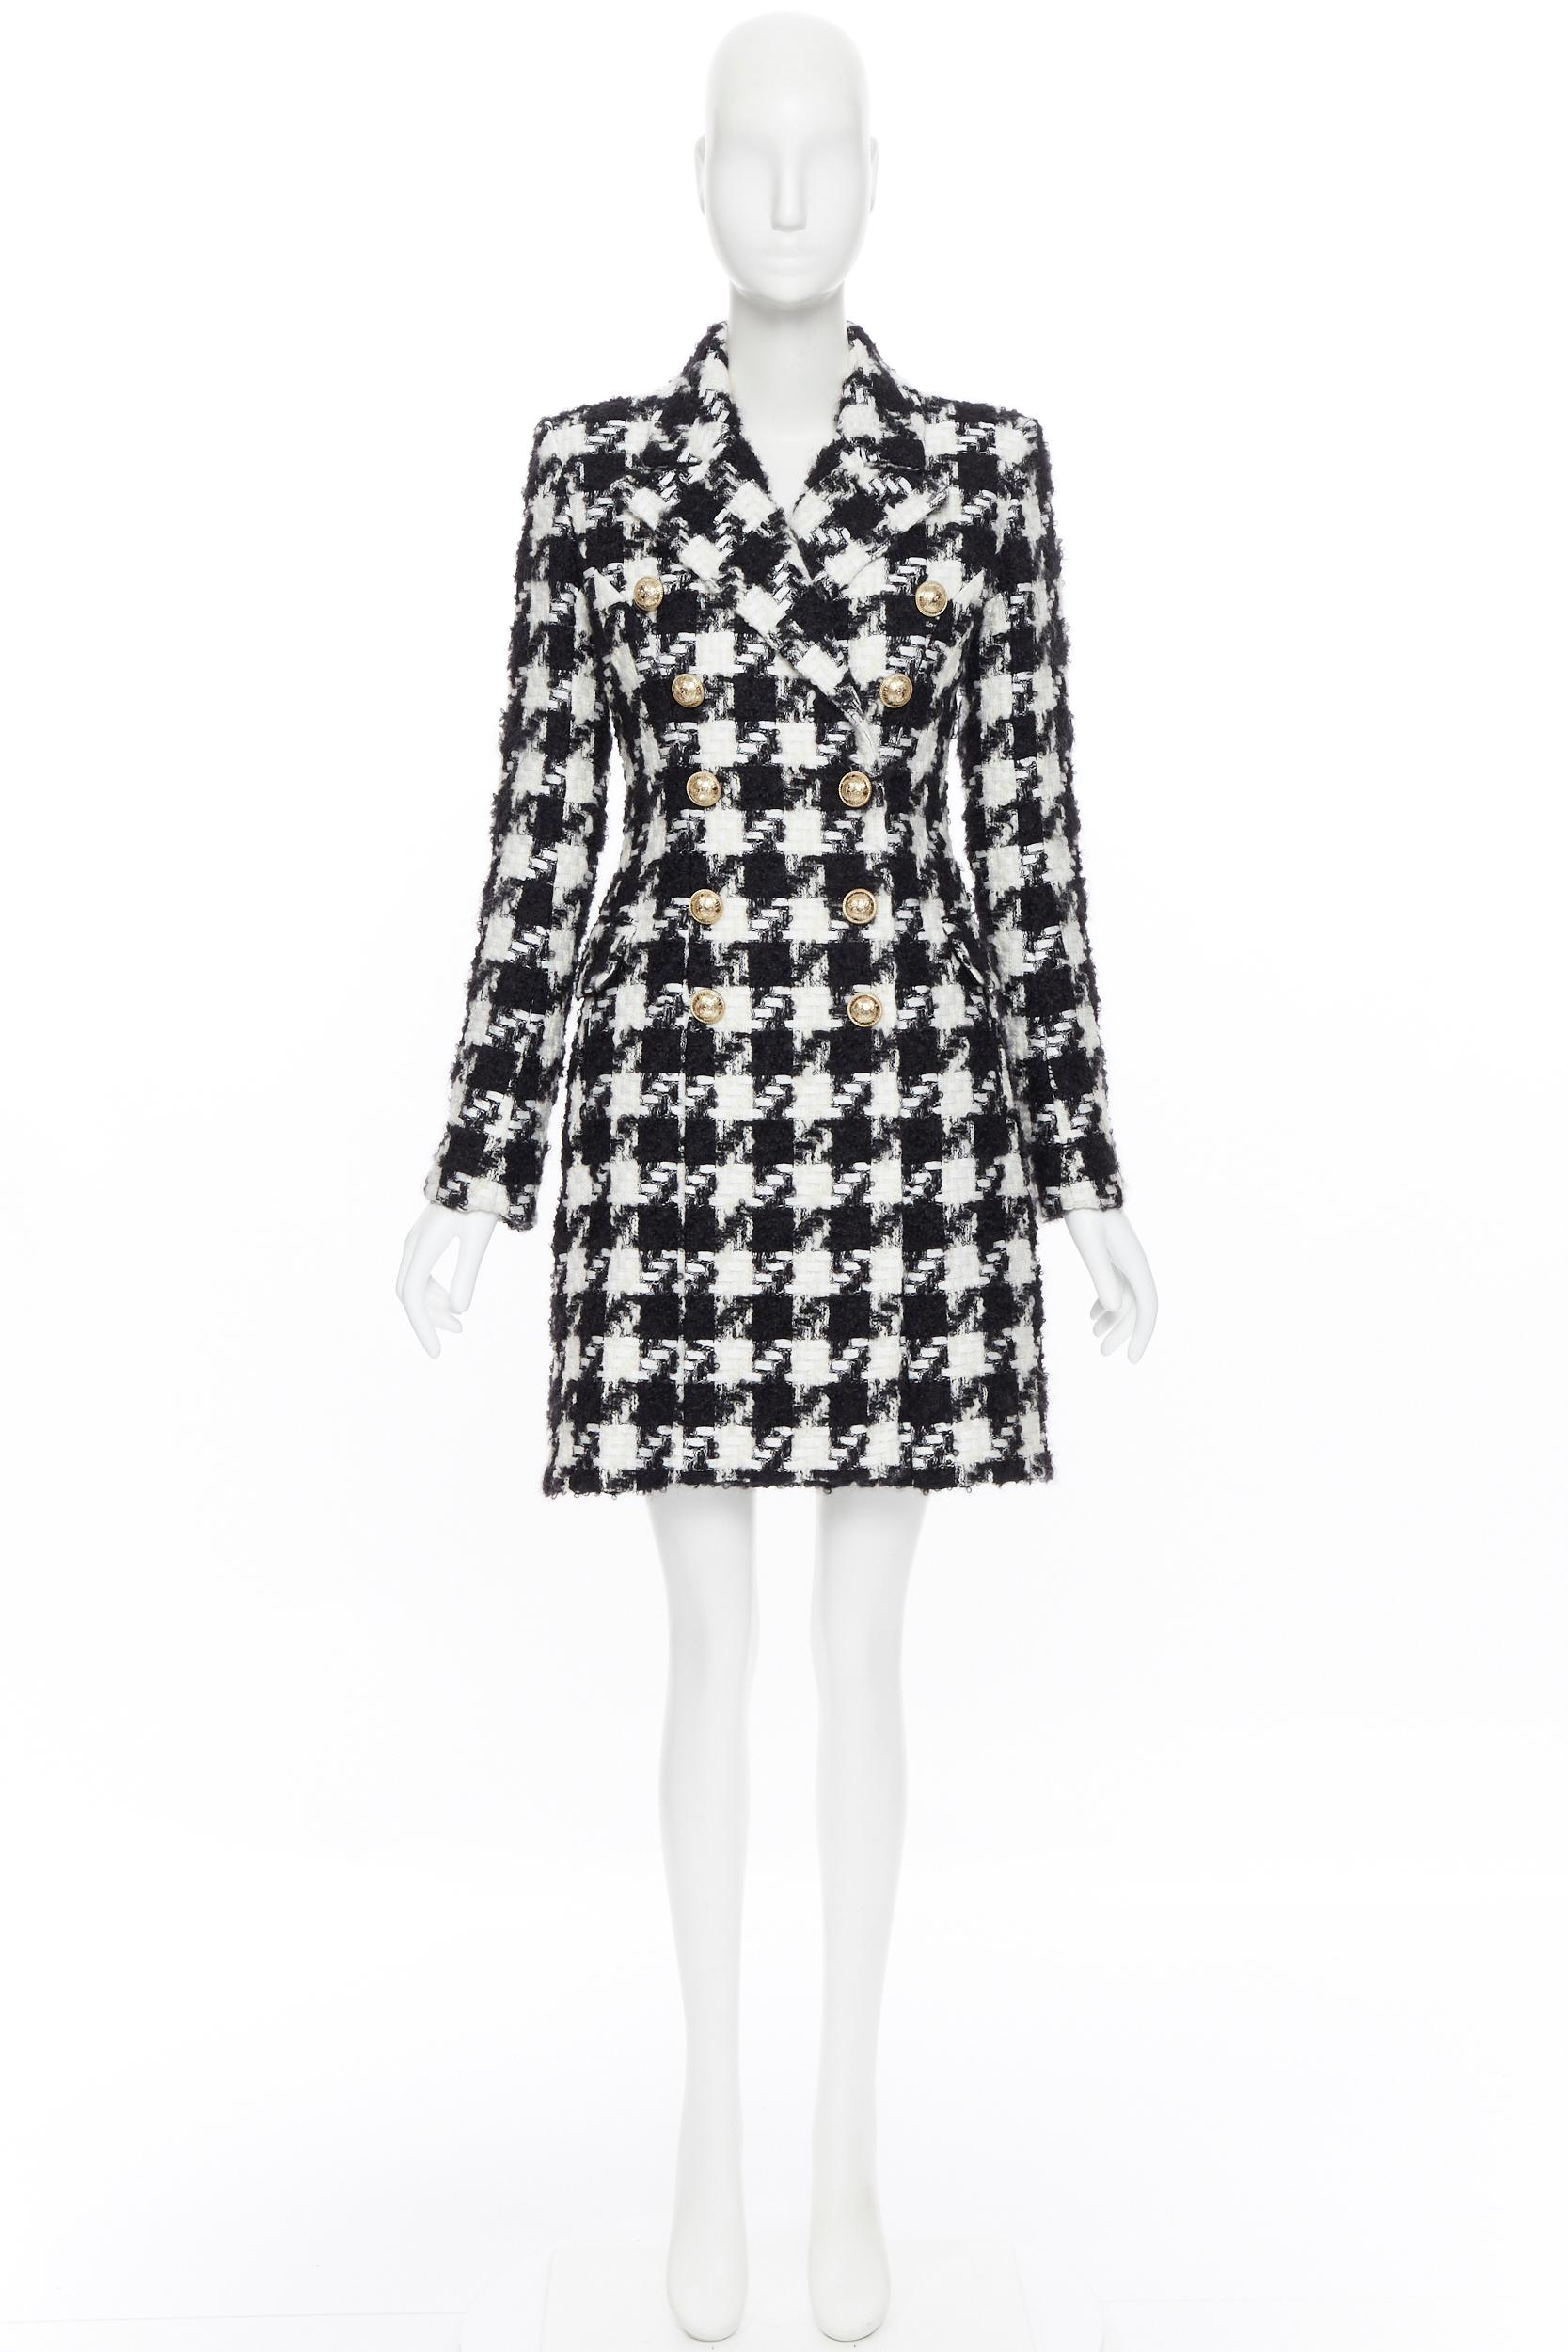 new BALMAIN black white houndstooth tweed double breasted military coat FR34 XS
Brand: Balmain
Designer: Olivier Rousteing
Model Name / Style: Double breasted coat
Material: Wool mohair blend
Color: Black, white
Pattern: Houndstooth
Closure: